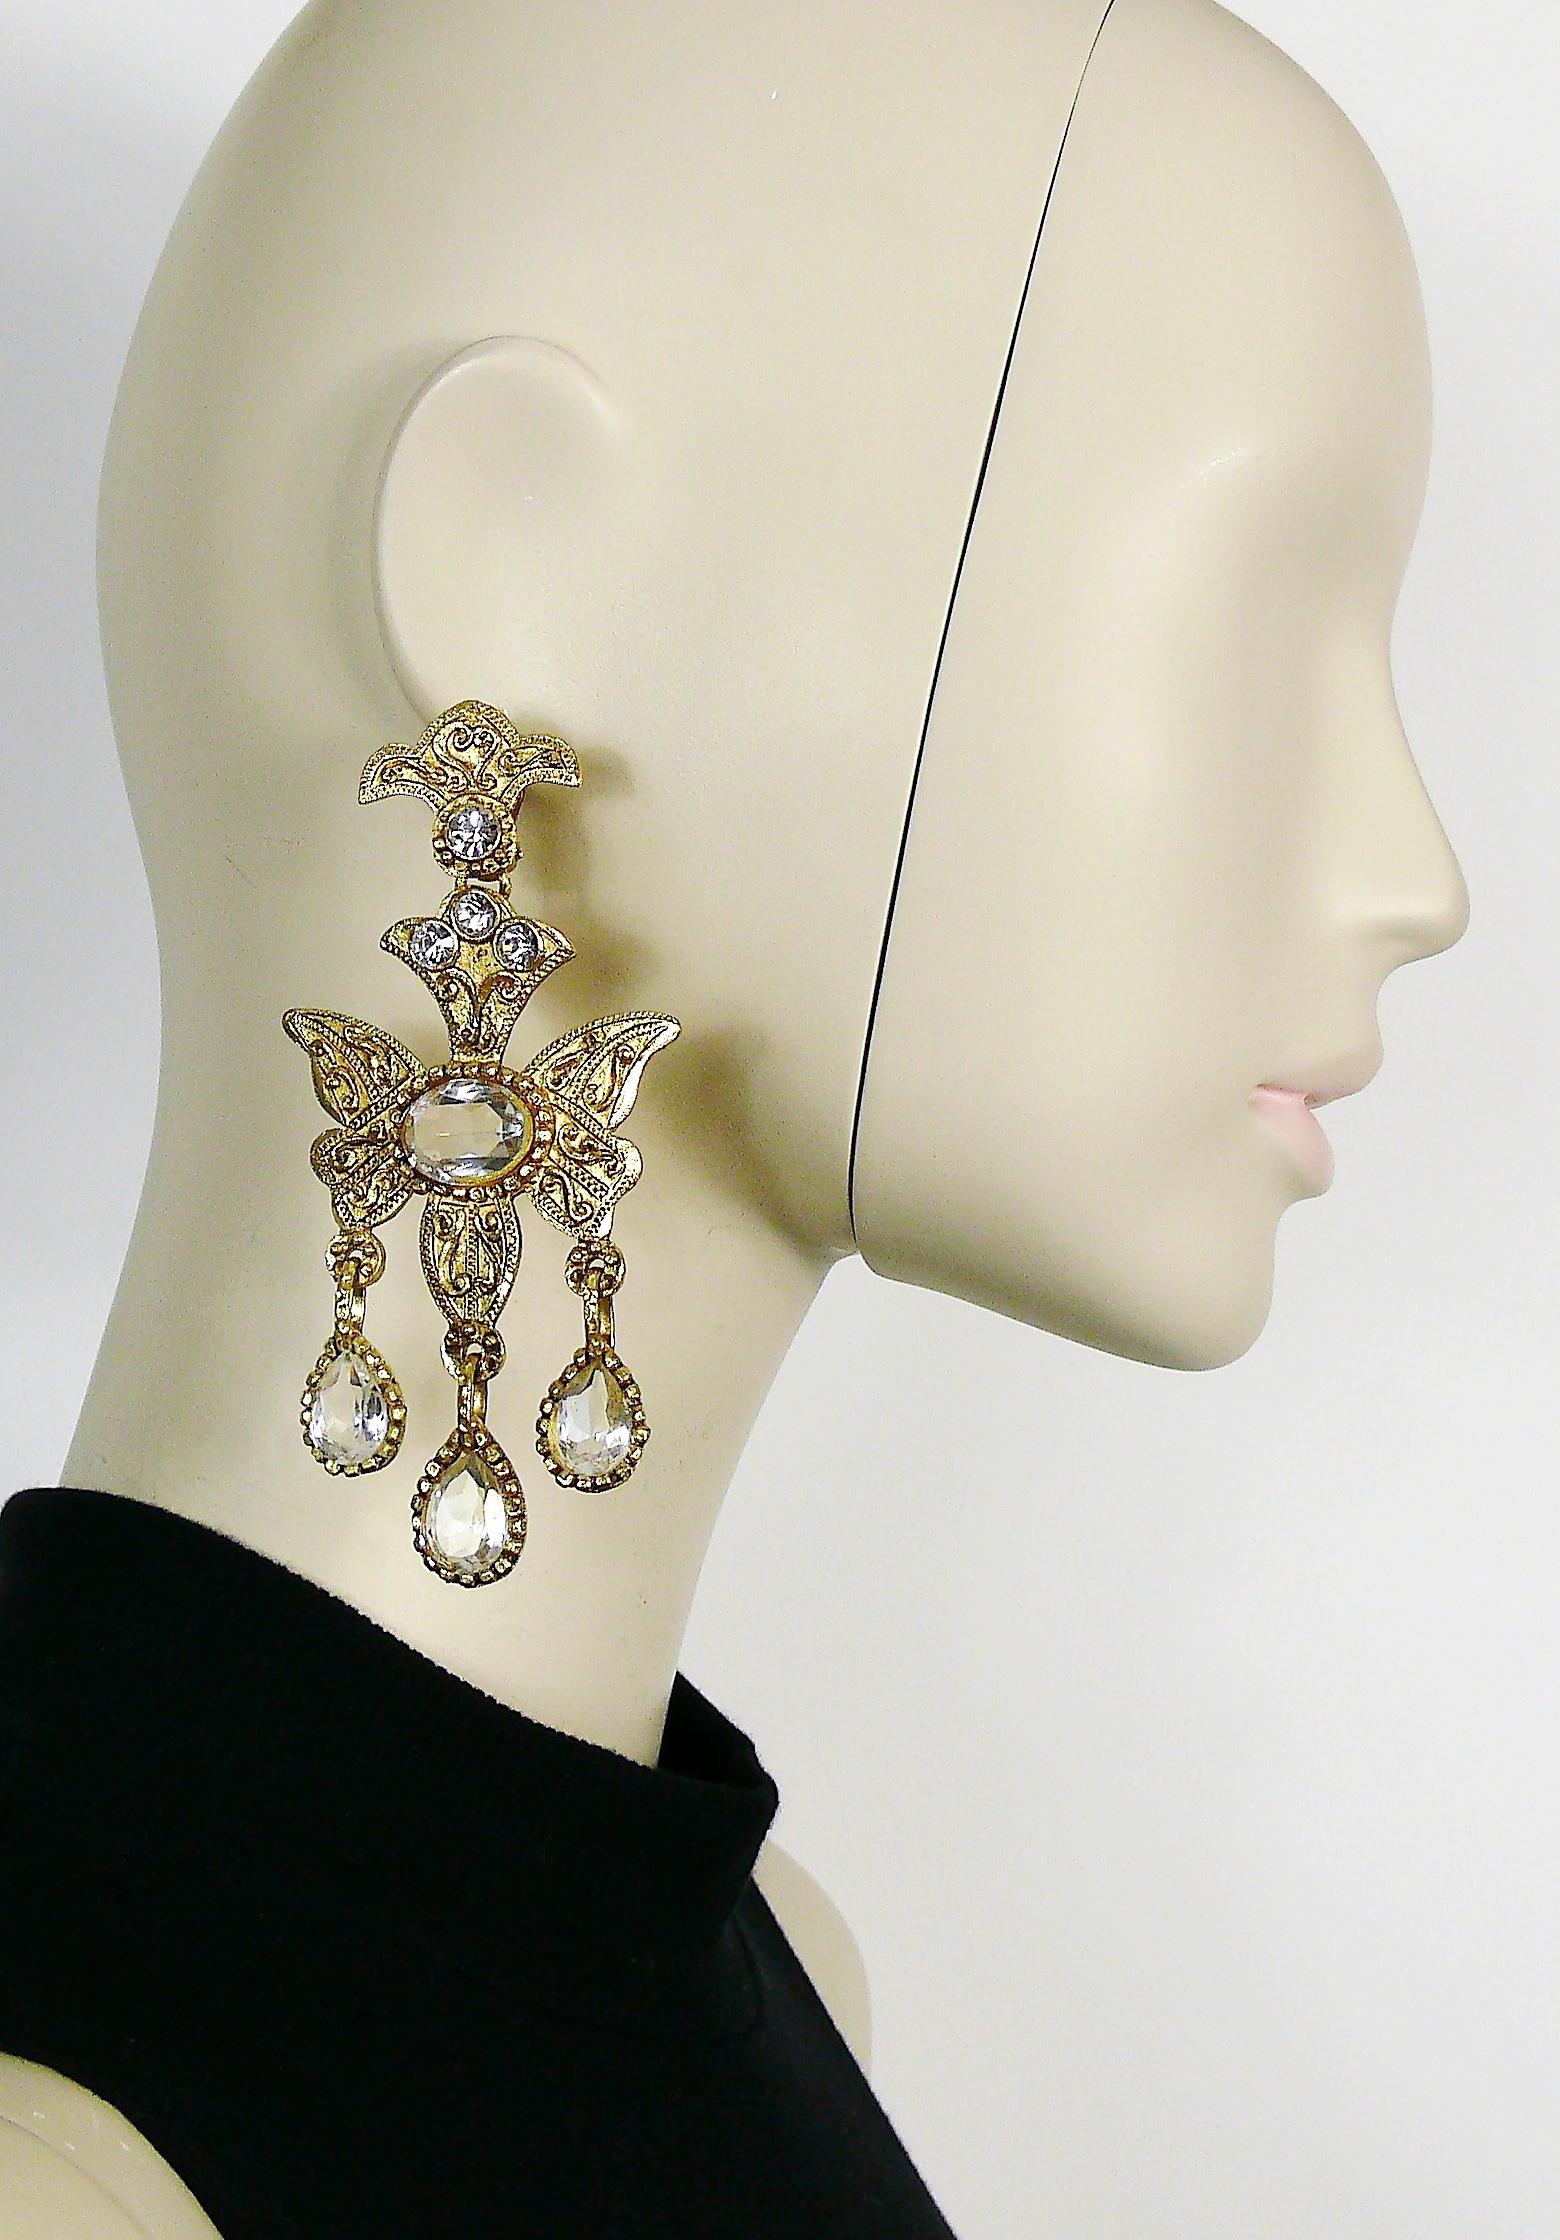 CHRISTIAN LACROIX vintage massive gold toned chandelier earrings (clip-on) featuring a stylized butterfly embellished with arabesques, friezes, and white crystals.

Marked CHRISTIAN LACROIX CL Made in France.

Indicative measurements : max. height